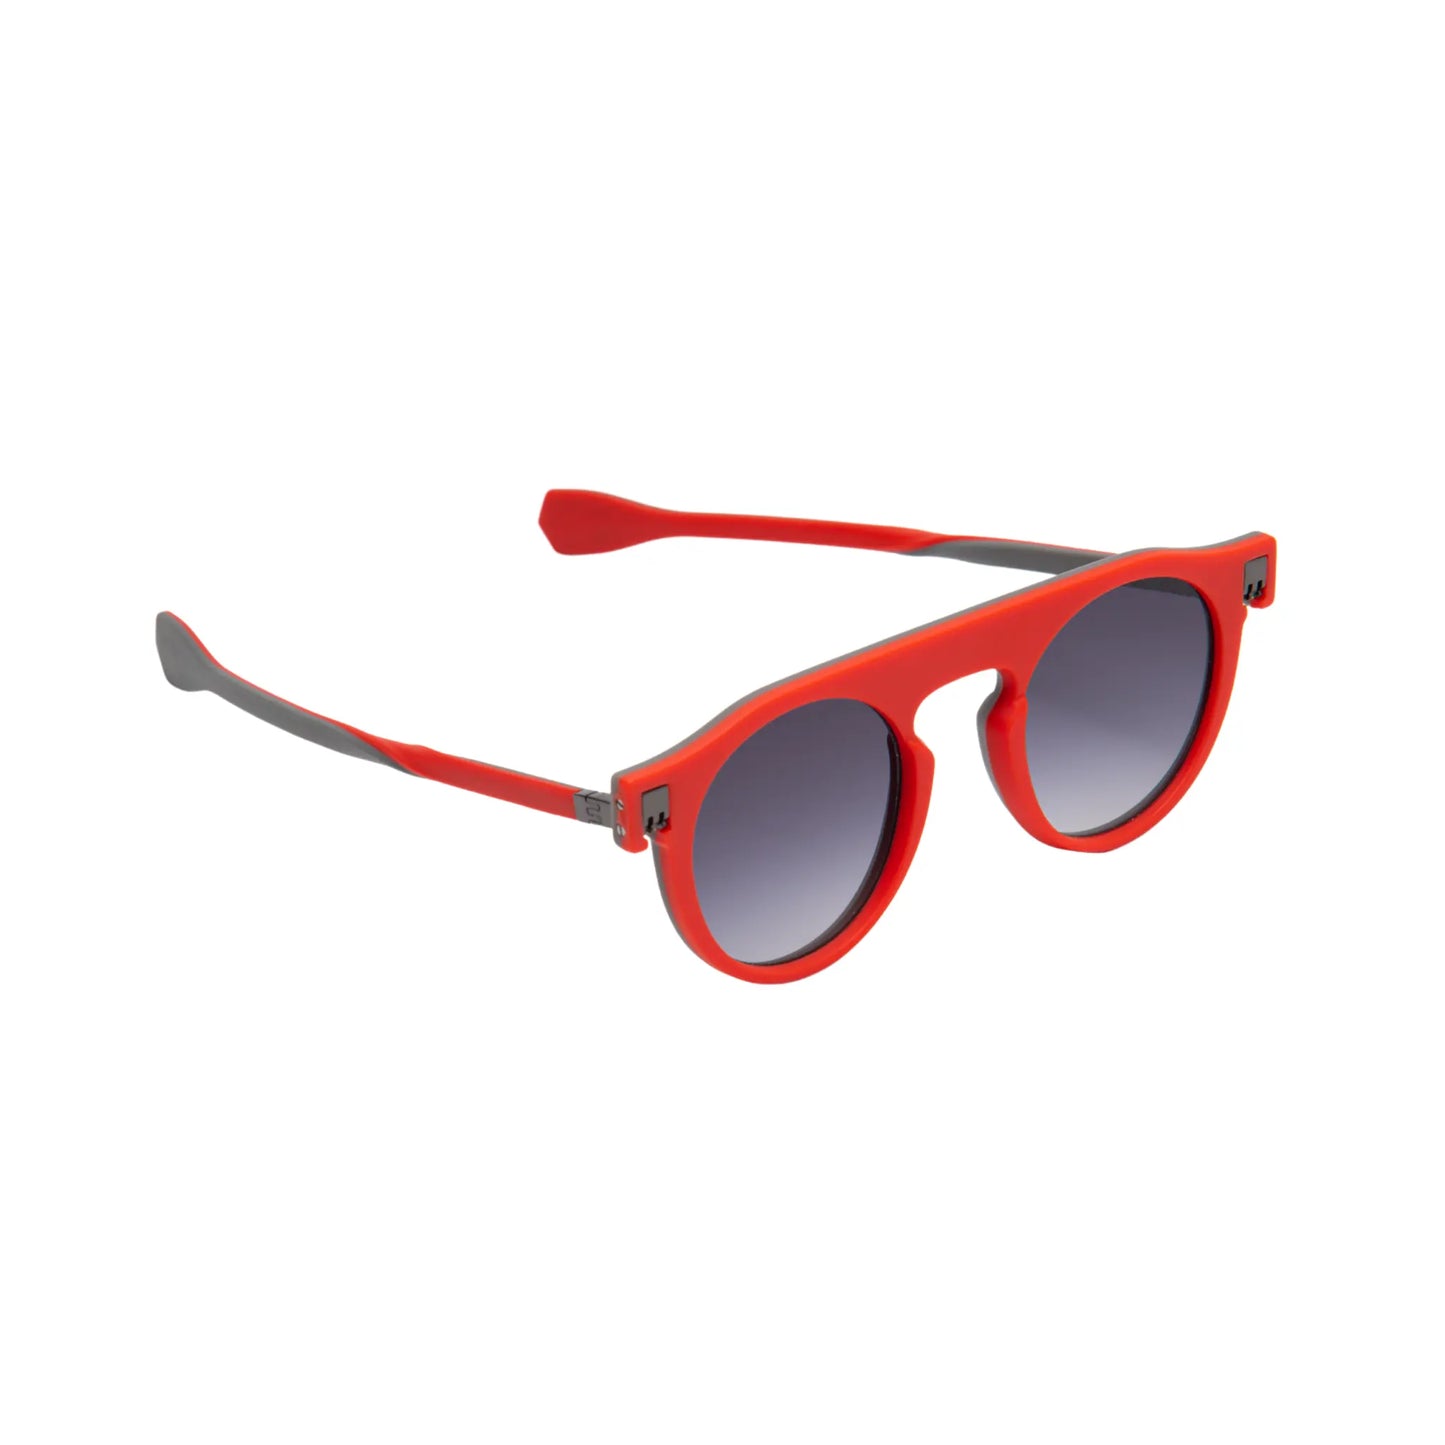 Reverso sunglasses grey & red reversible & ultra light side view